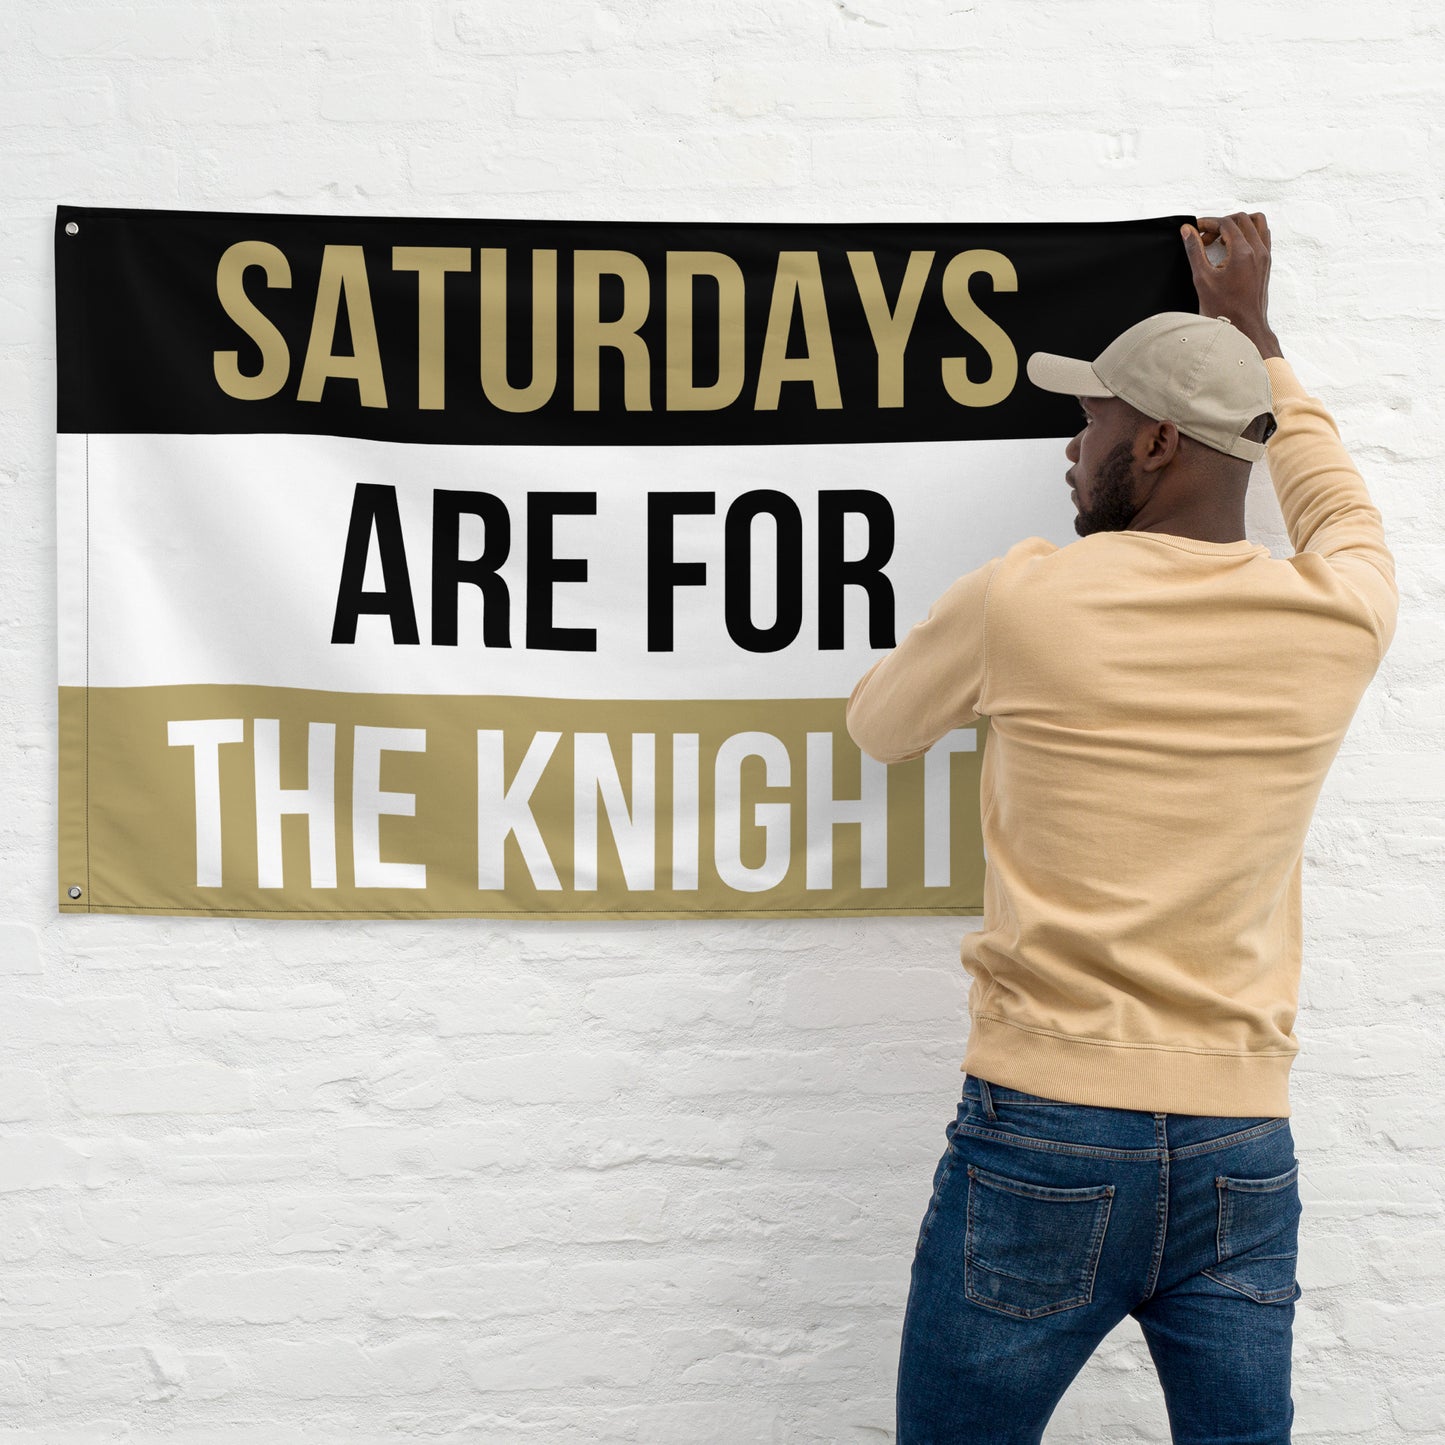 Saturdays Are for the Knights, Large Knights Banner, UCF Flag